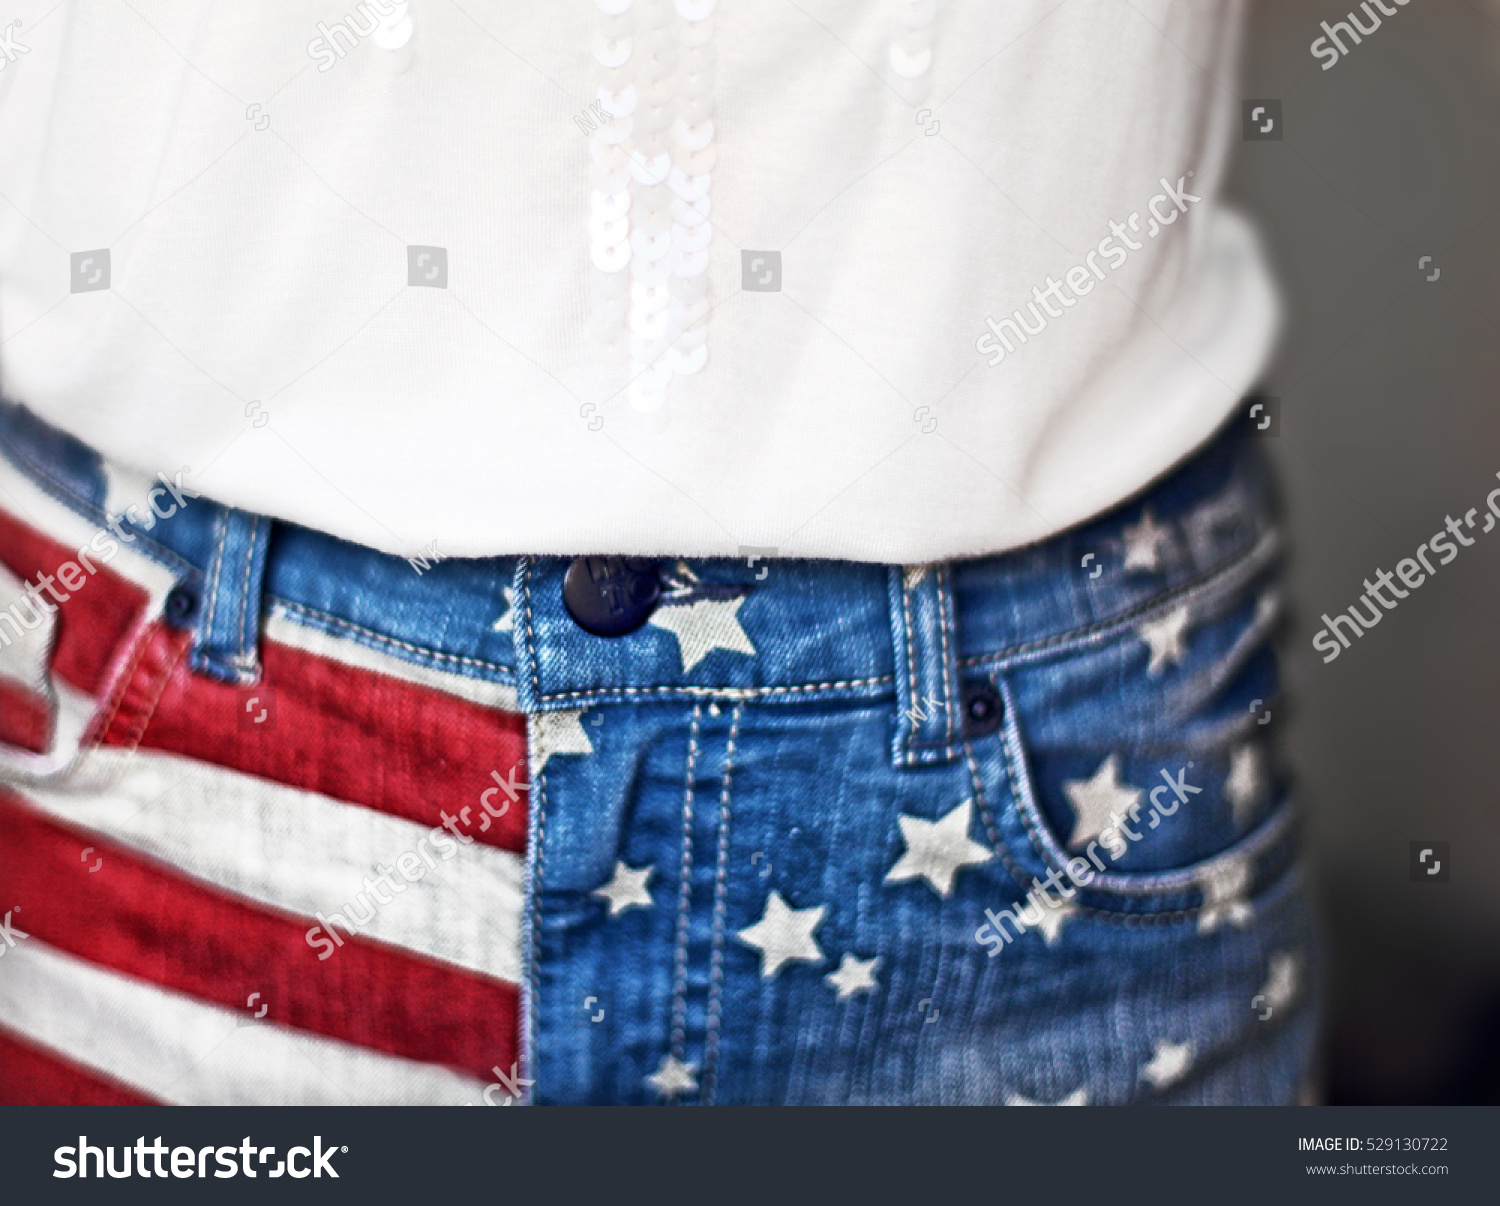 stars and stripes jean shorts